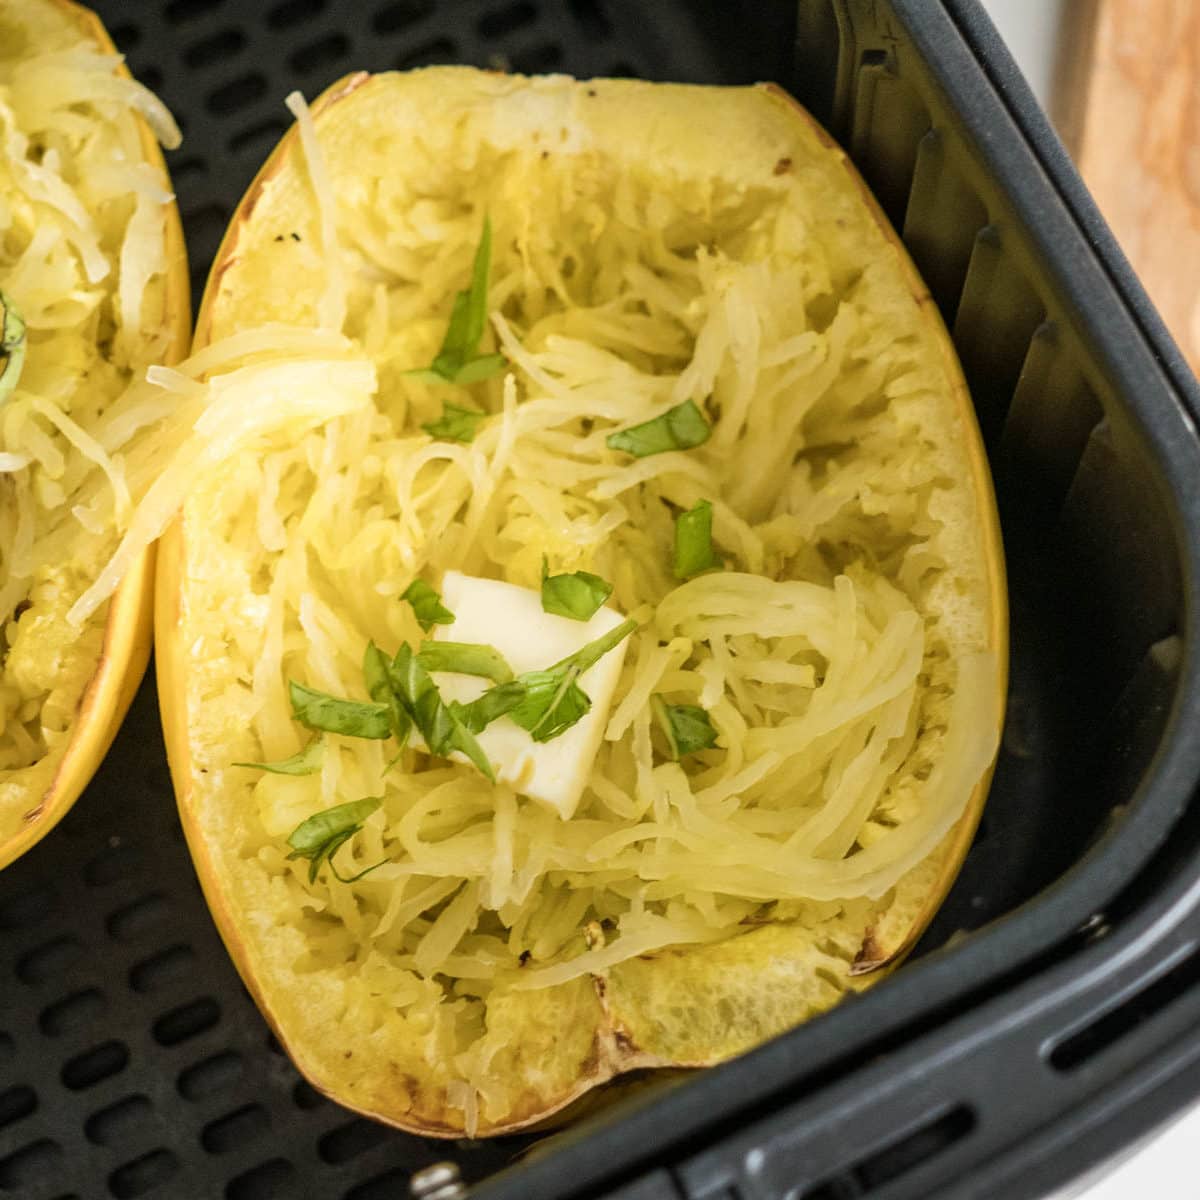 Top view of cooked spaghetti squash with some on a fork.